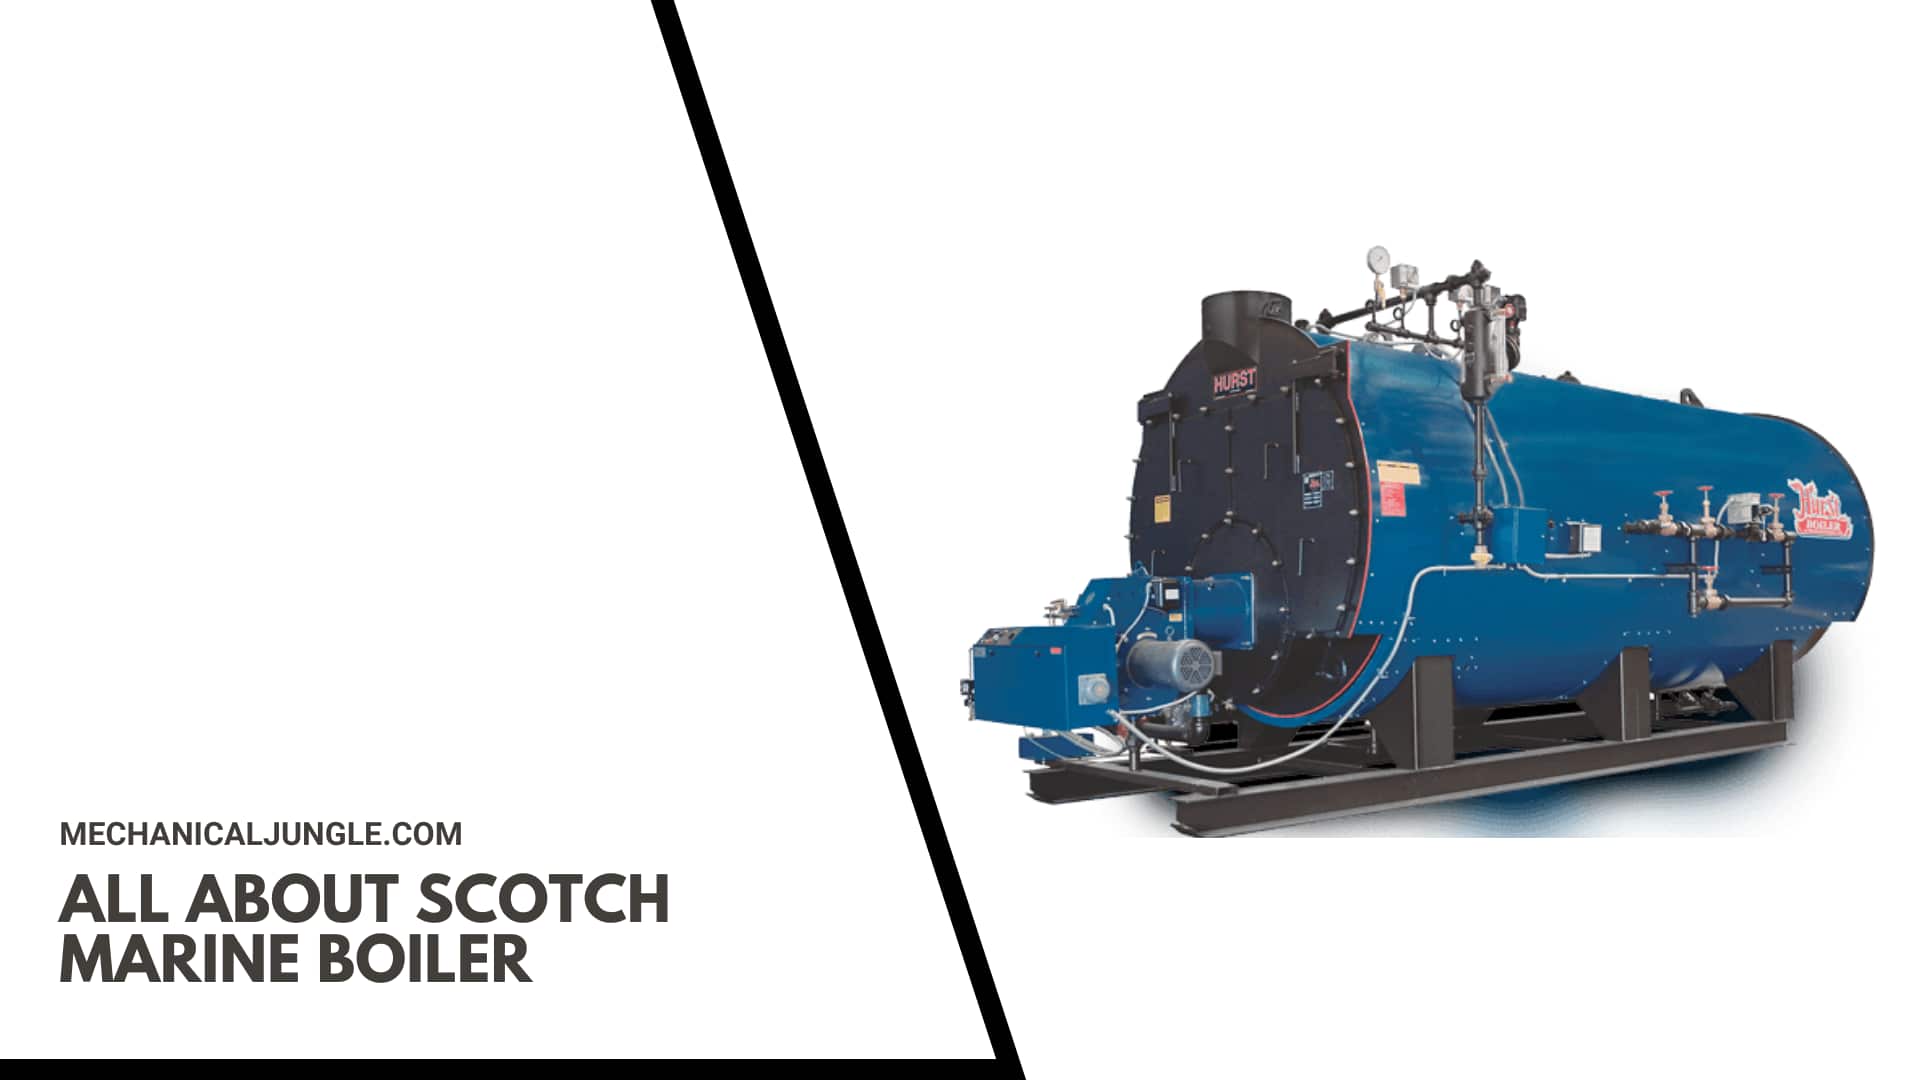 All About Scotch Marine Boiler